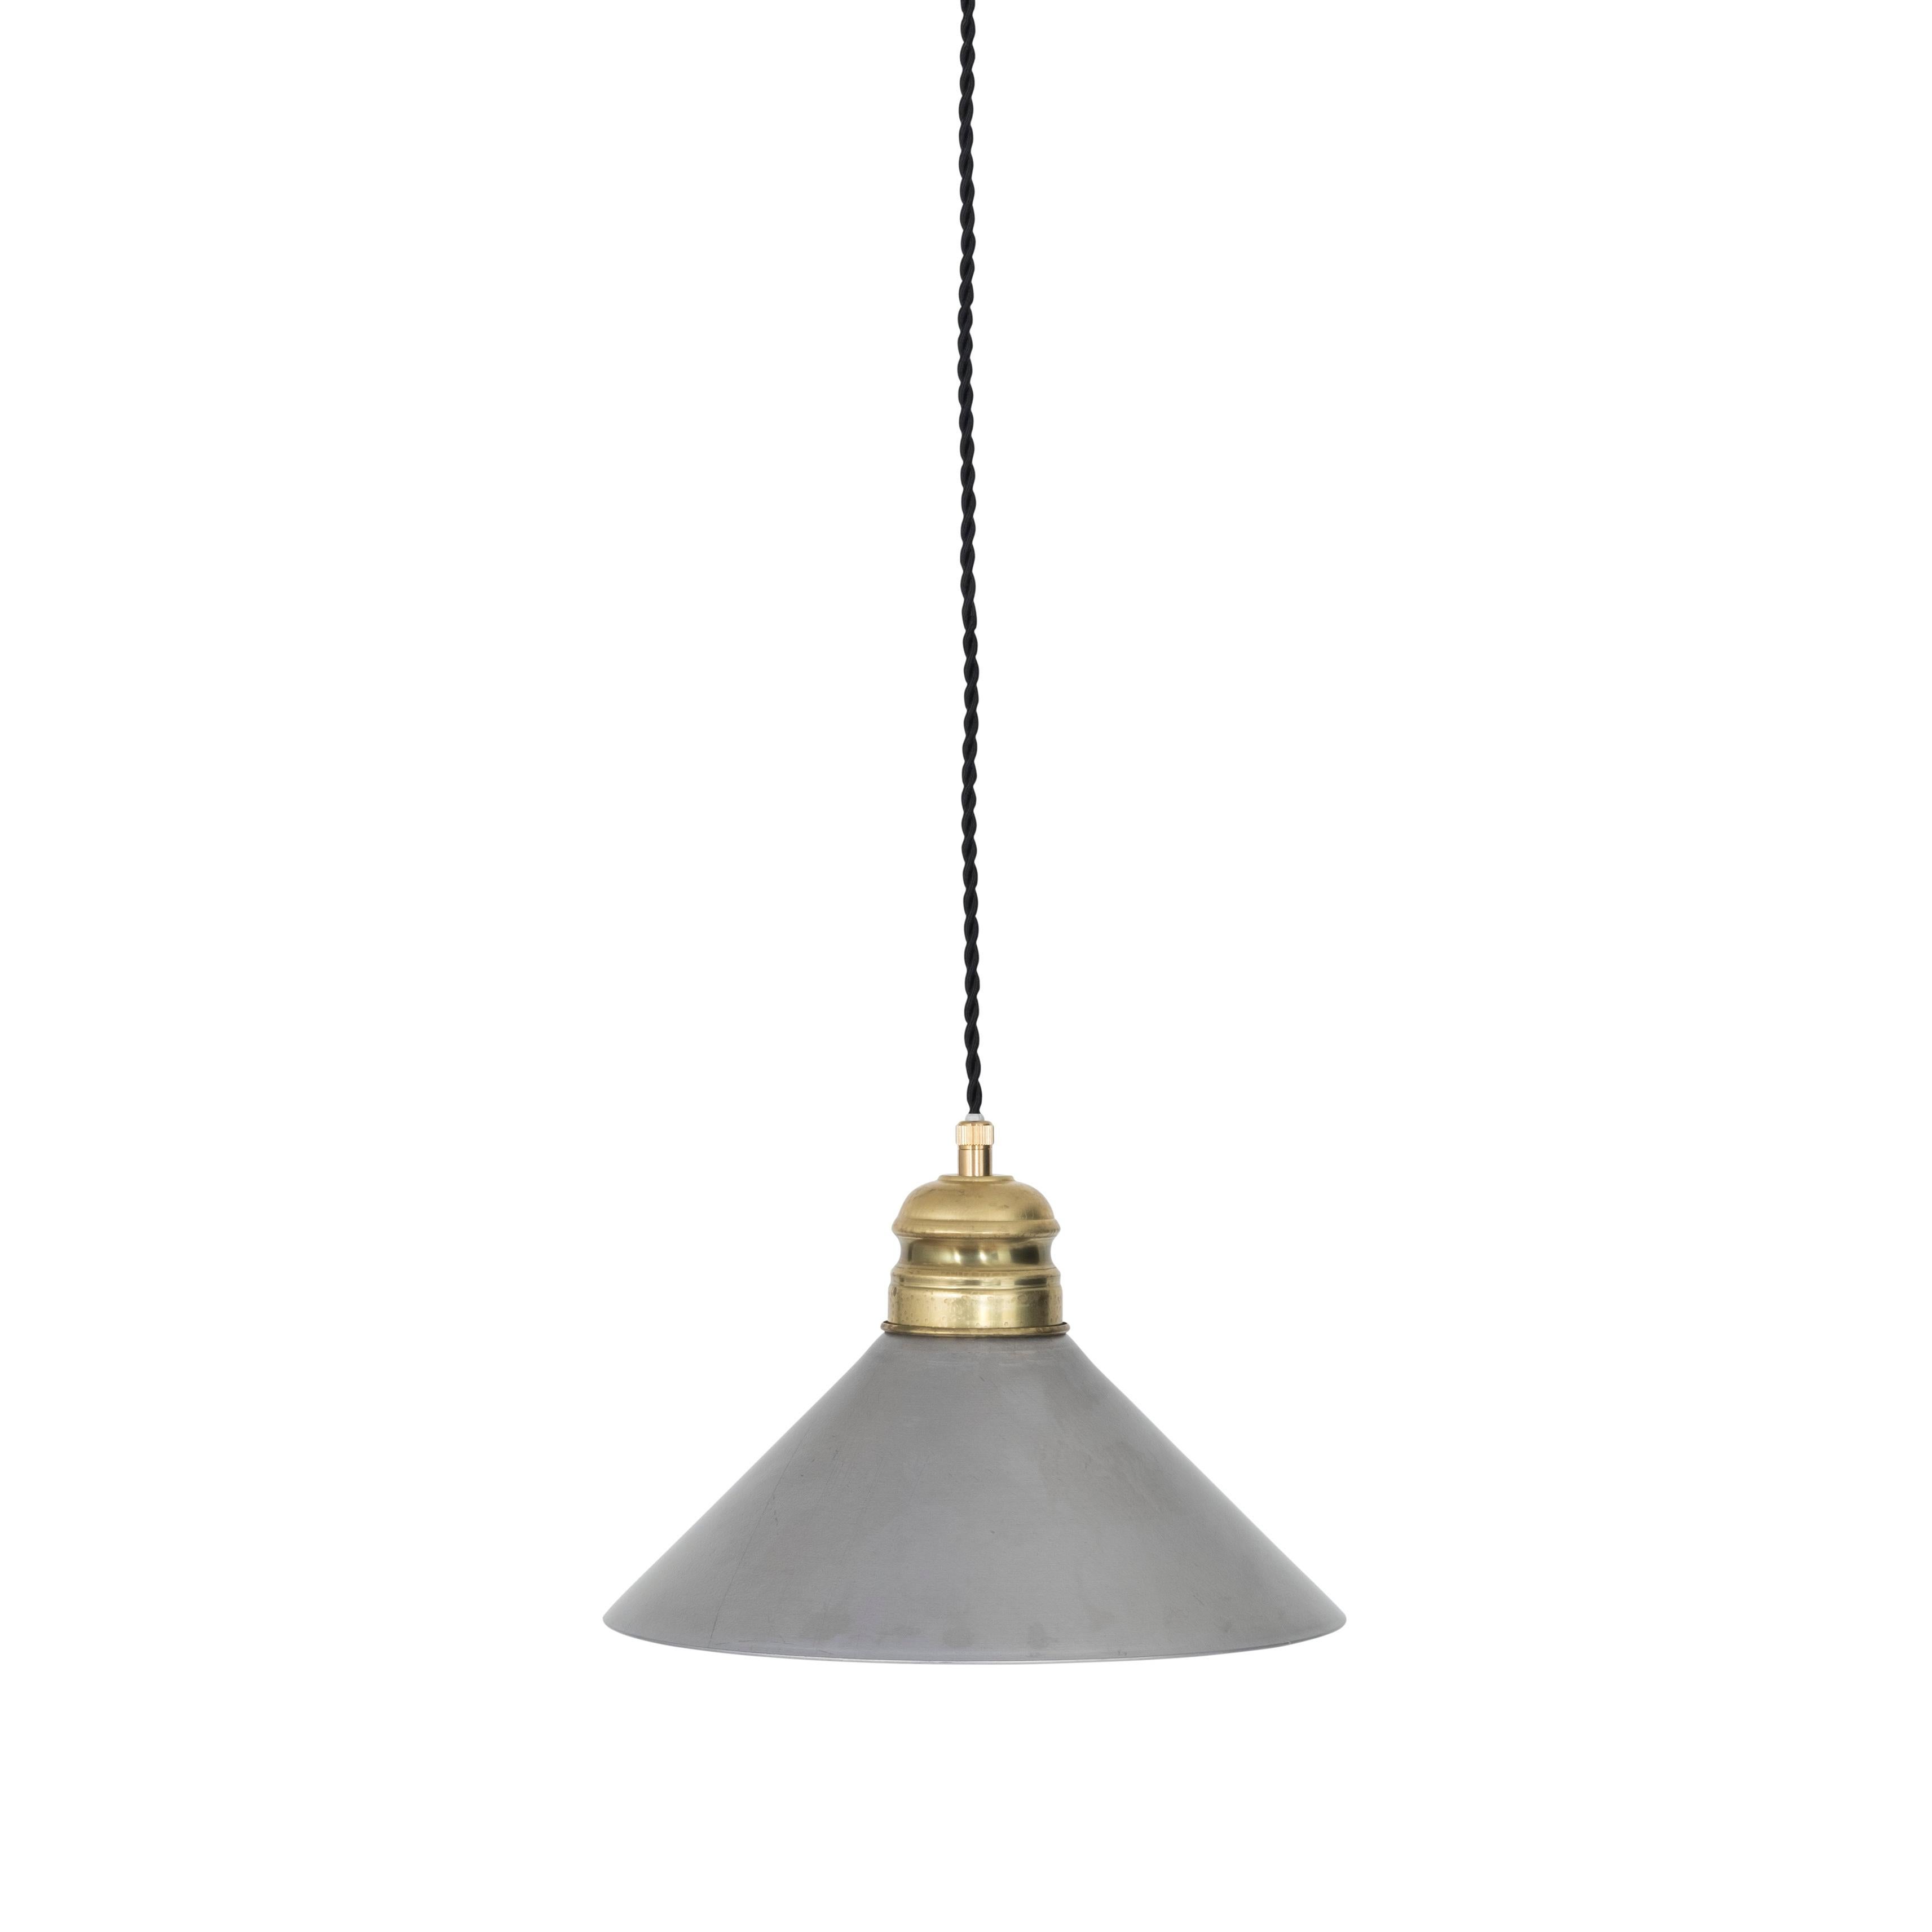 Rustik
Cord 1.5 m
Max 40 W E27
0054-5 shade raw alu
D. 250 mm

The lamps are wiring with standard Europe wiring.

The traditional shoemaker's lamp in Konsthantverk's own vintage. A Classic in the kitchen with a timeless design. Shade and hang in raw